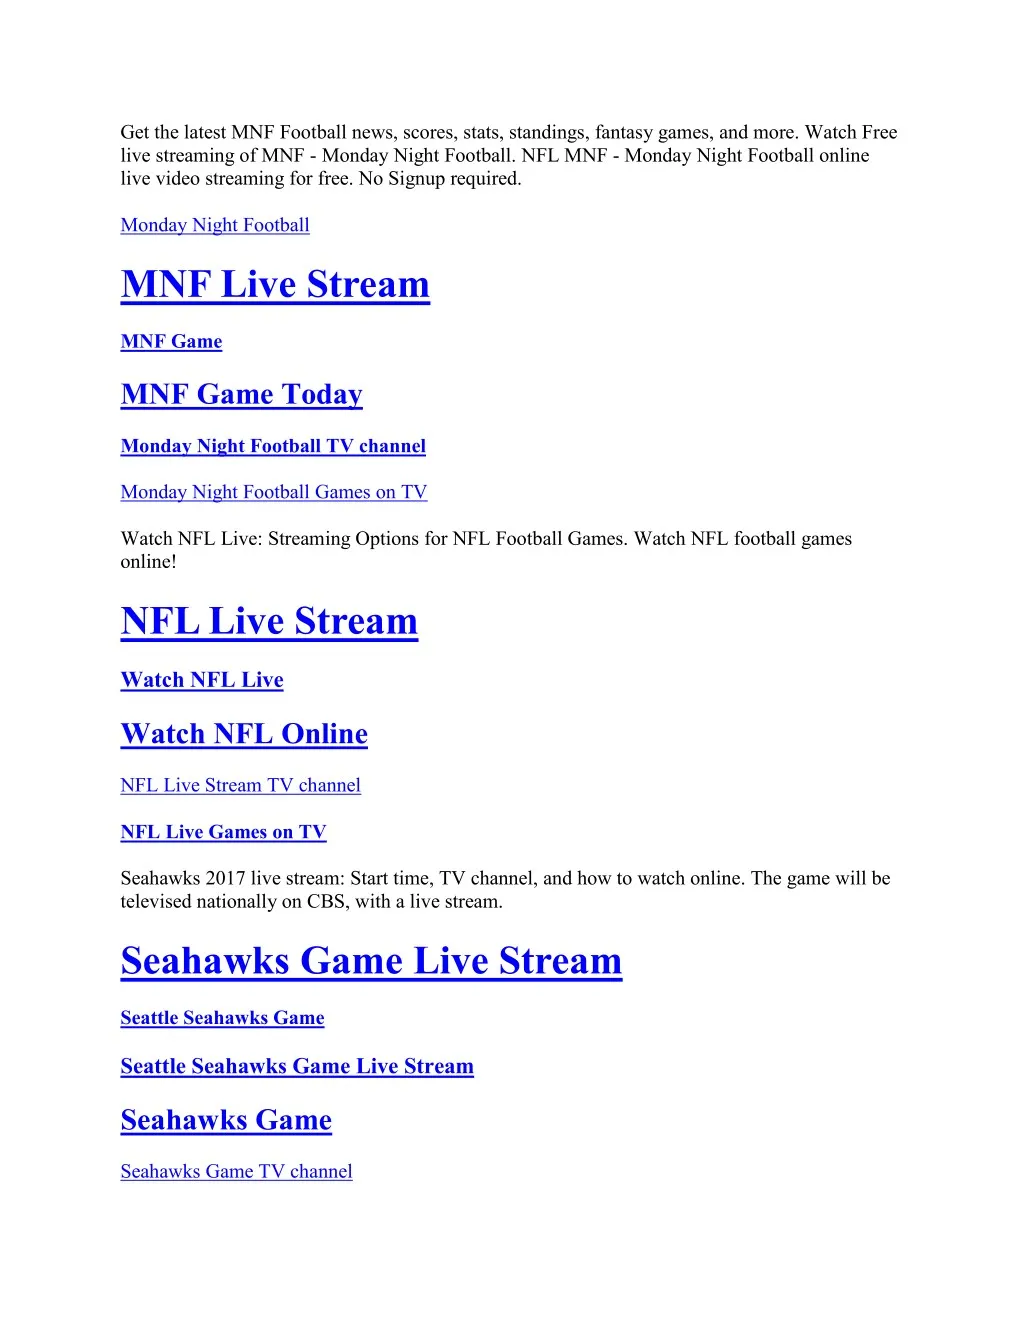 get the latest mnf football news scores stats